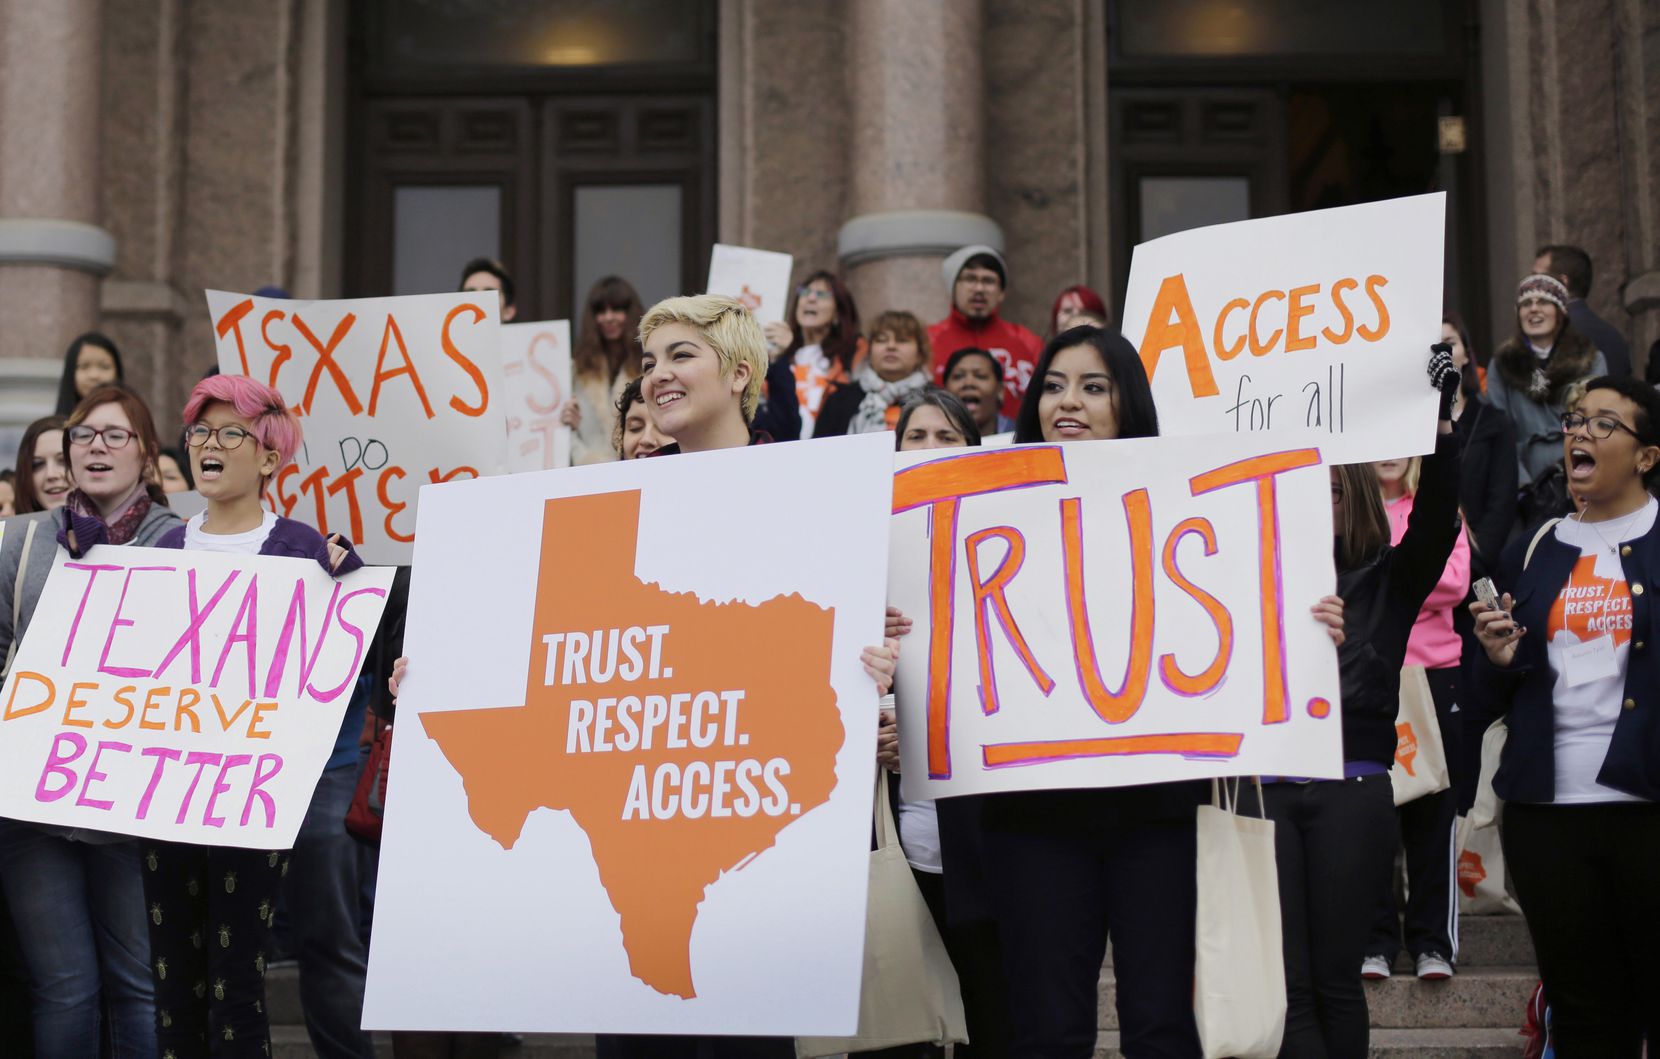 Women in Texas have been battling the erosion of abortion rights for almost two decades. This 2015 rally by students and abortion rights activists on the steps of the Texas Capitol in Austin protested previous restrictions put in place by the state Legislature.